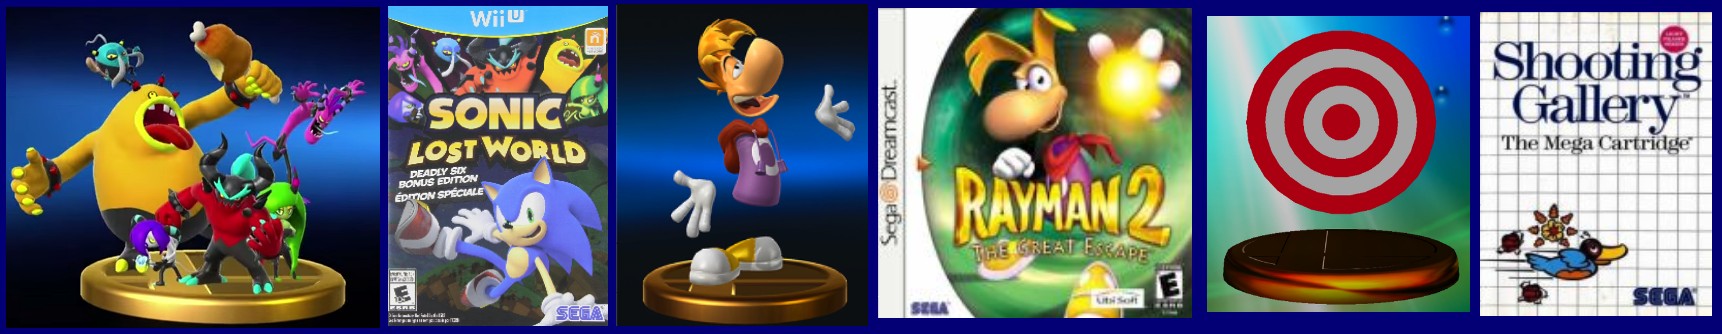 review_sort_of_smash_bros_trophies_deadly_six_rayman_target